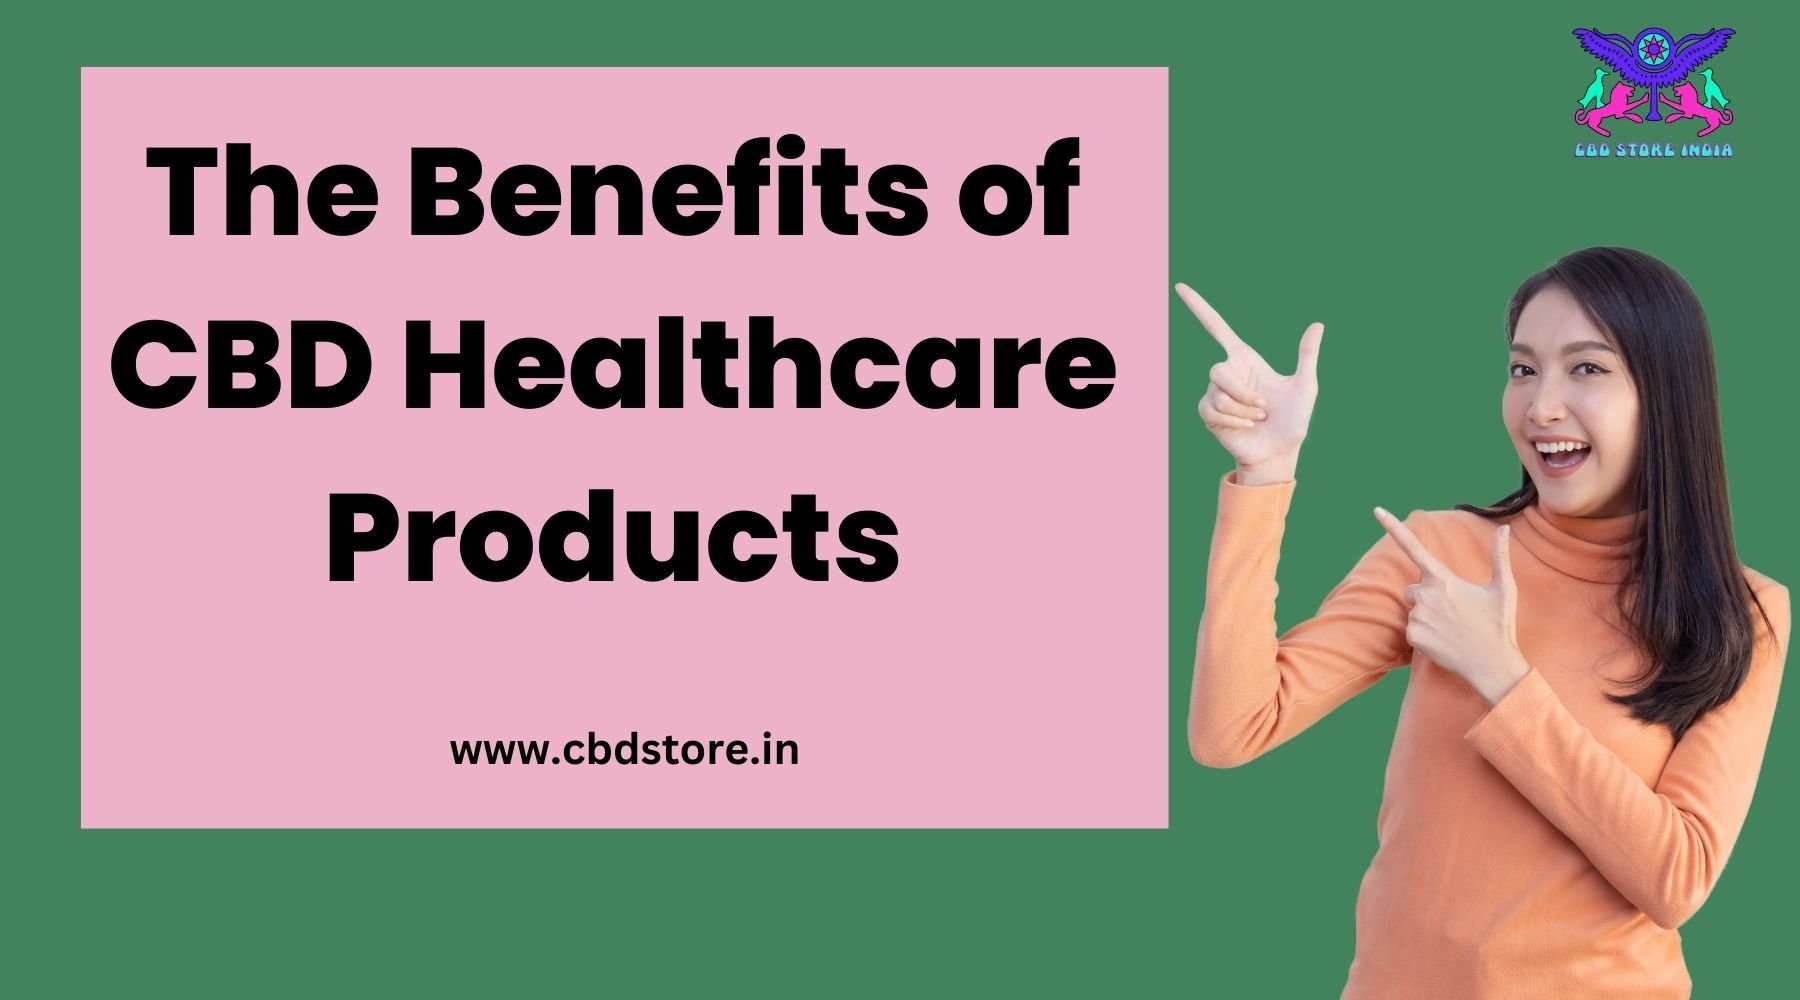 What are the Benefits of CBD Health care products in daily life? - CBD Store India